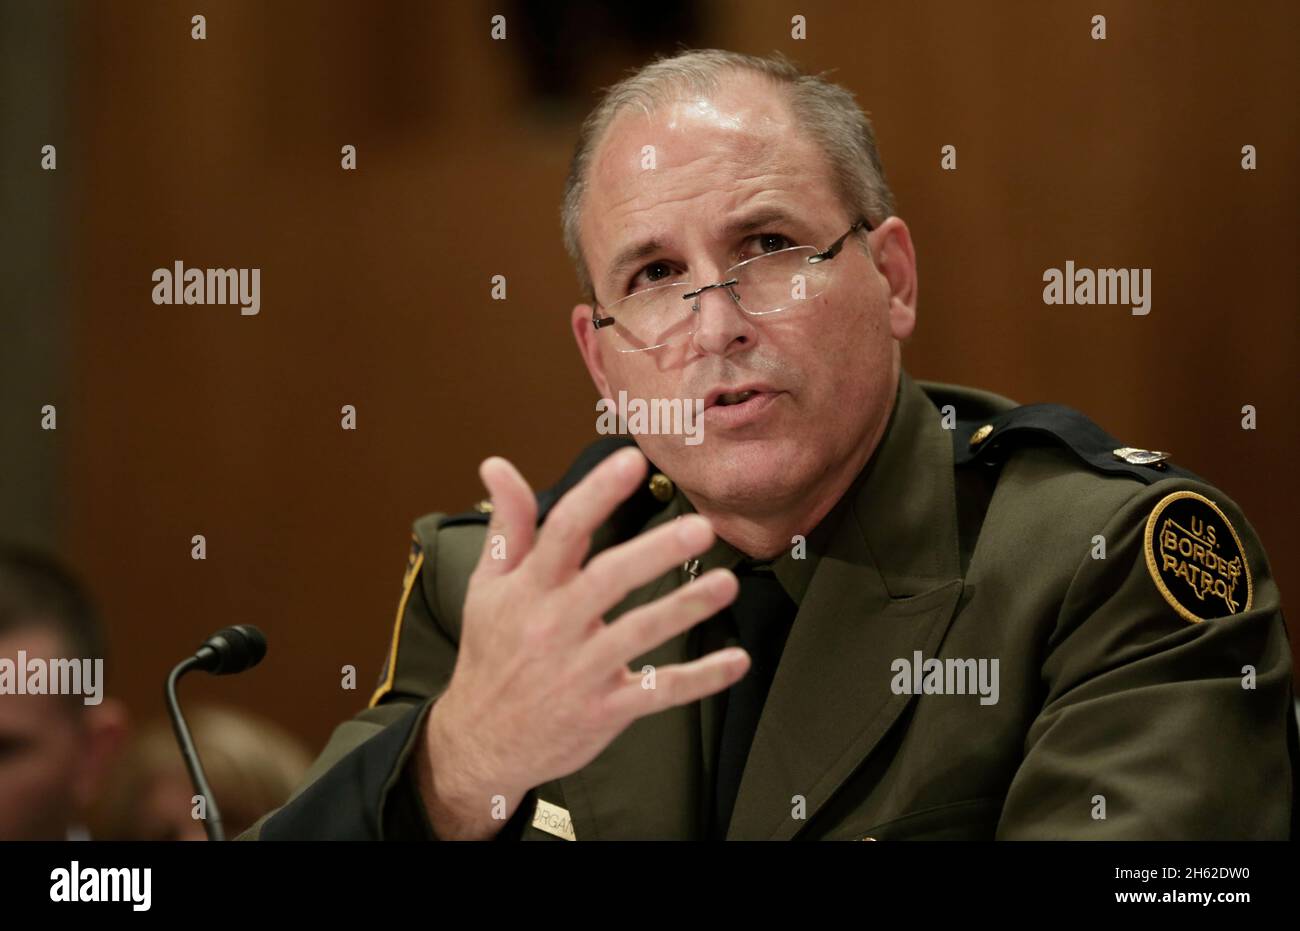 U.S. Border Patrol Chief Mark Morgan testifies before the Senate Committee on Homeland Security & Governmental Affairs in a hearing entitled “Initial Observations of the New Leadership at the U.S. Border Patrol” in the Dirksen Senate Building in Washington, D.C., November 30, 2016. Stock Photo